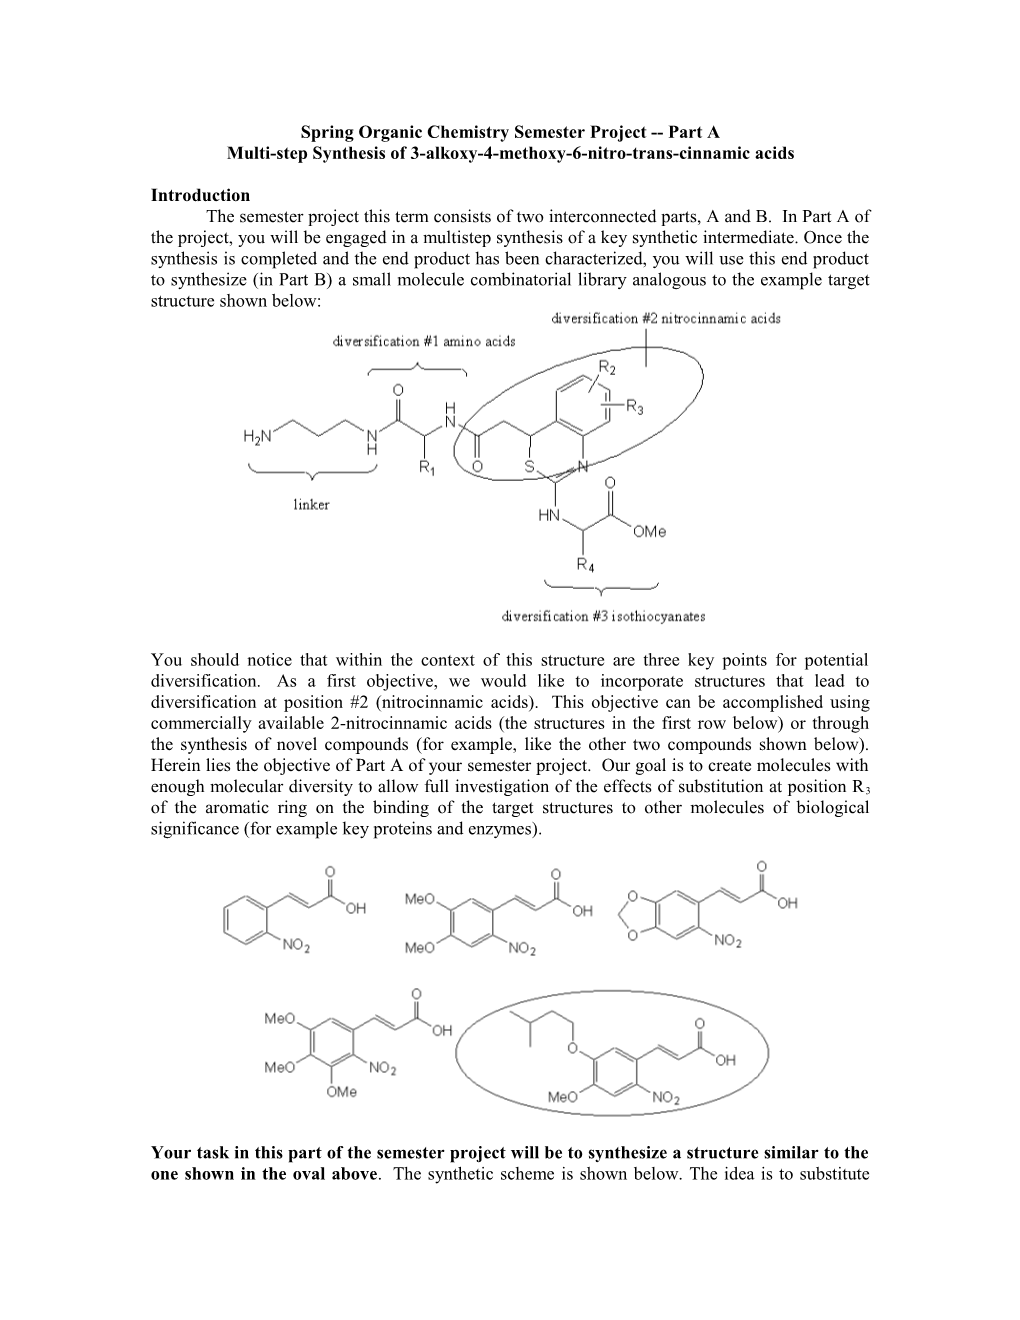 Spring Organic Chemistry Semester Project Part A